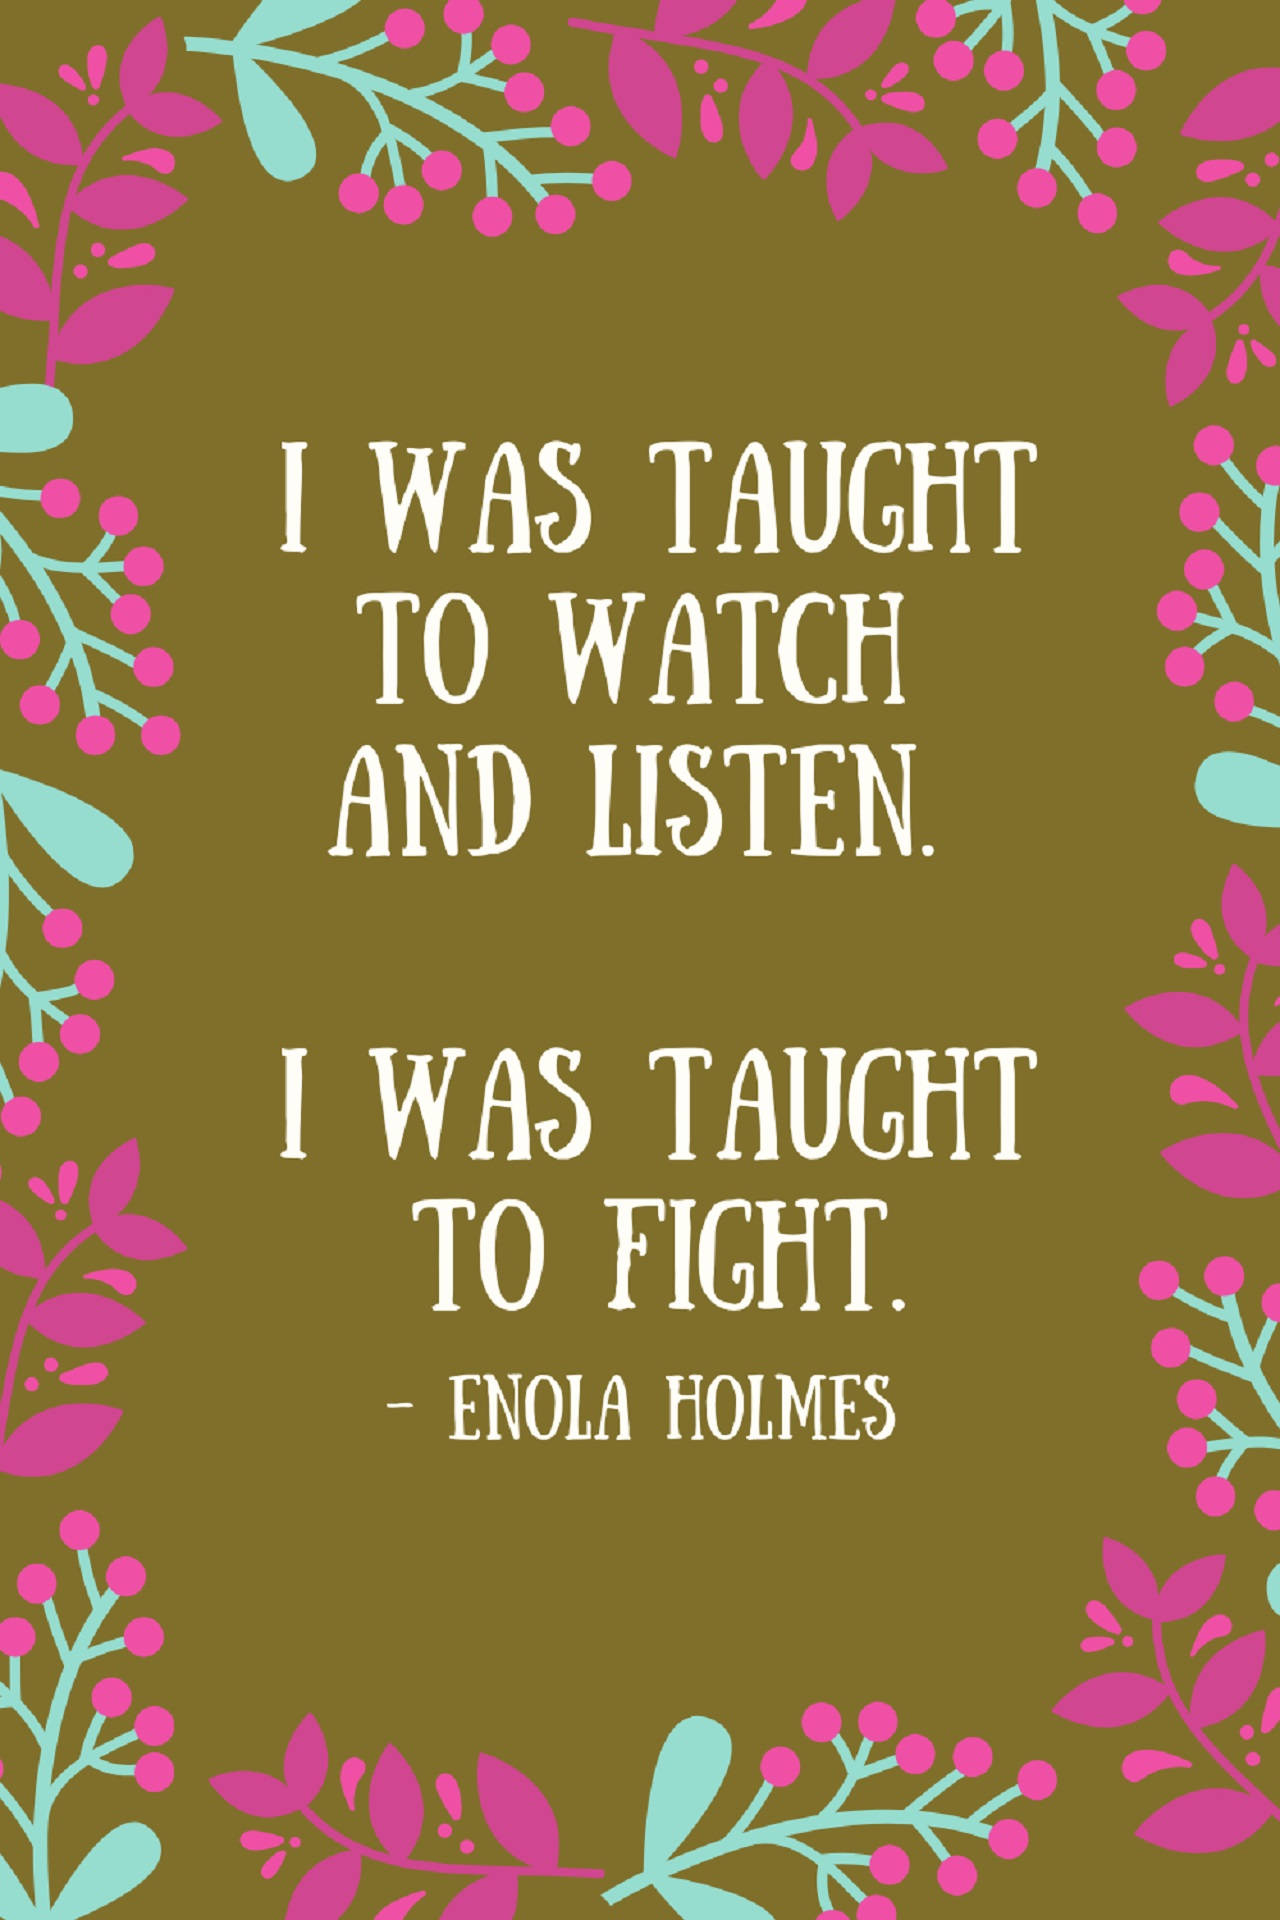 Enola Holmes Taught To Fight Quote Background